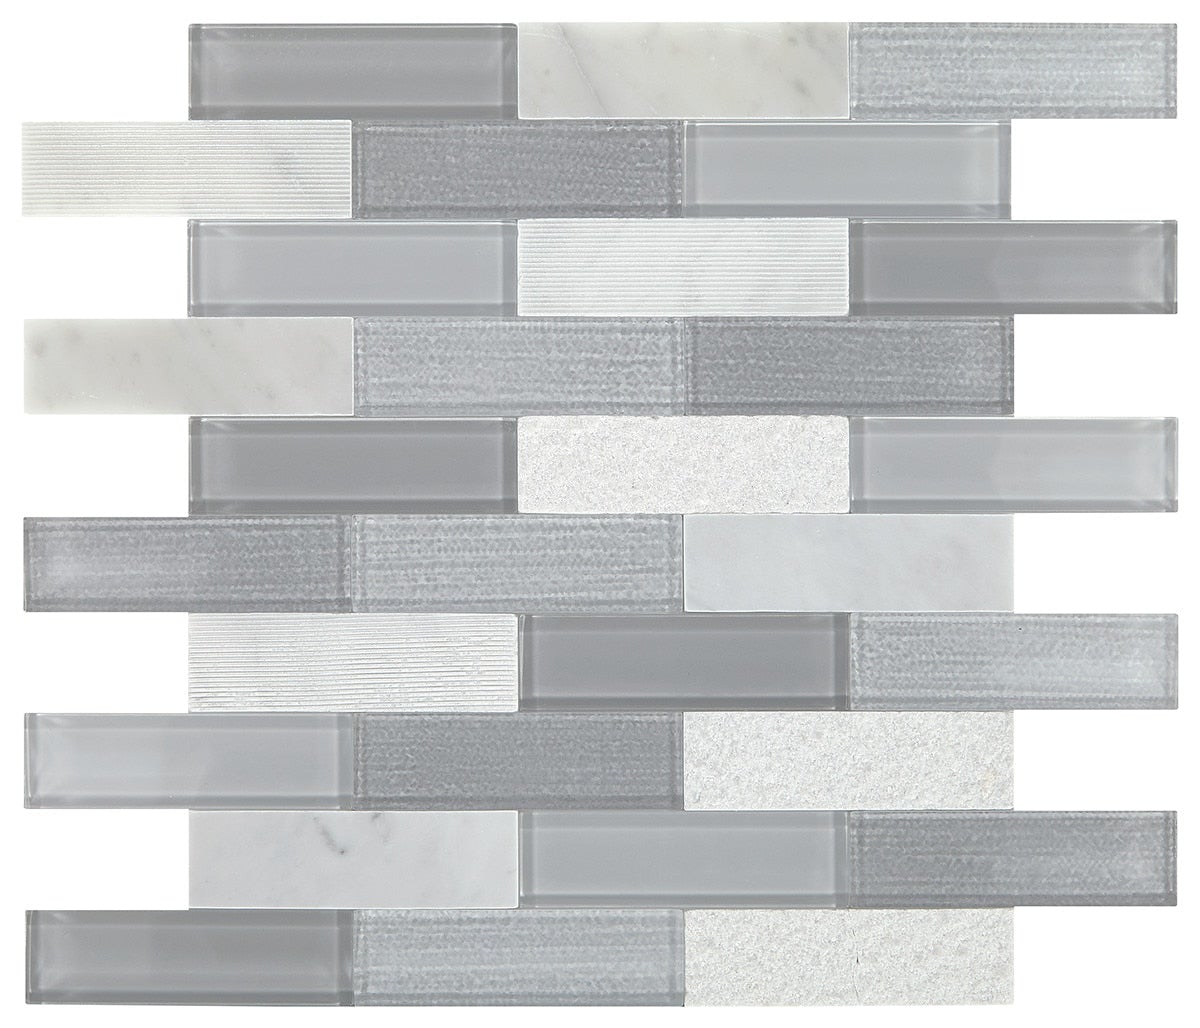 Daltile Simplystick Mosaix 11" x 11" Stormy Mist And Glass Blend Stone & Glass Mosaic